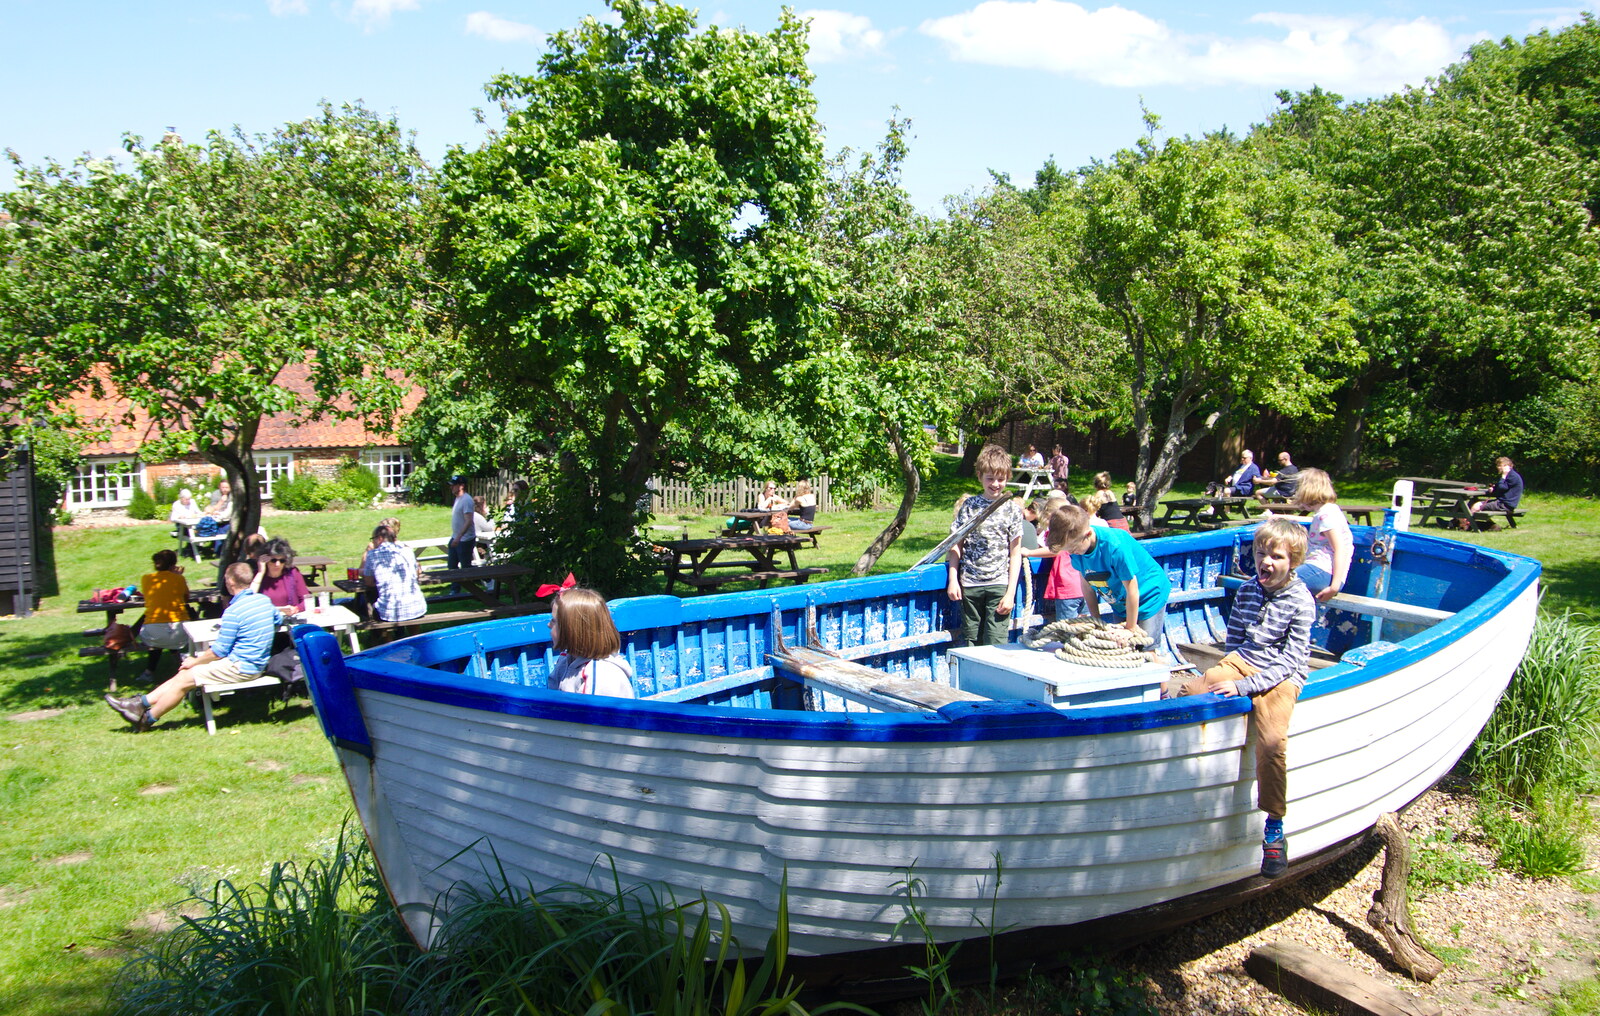 The children pile into a boat in the beer garden from Cliff House Camping, Dunwich, Suffolk - 15th June 2019